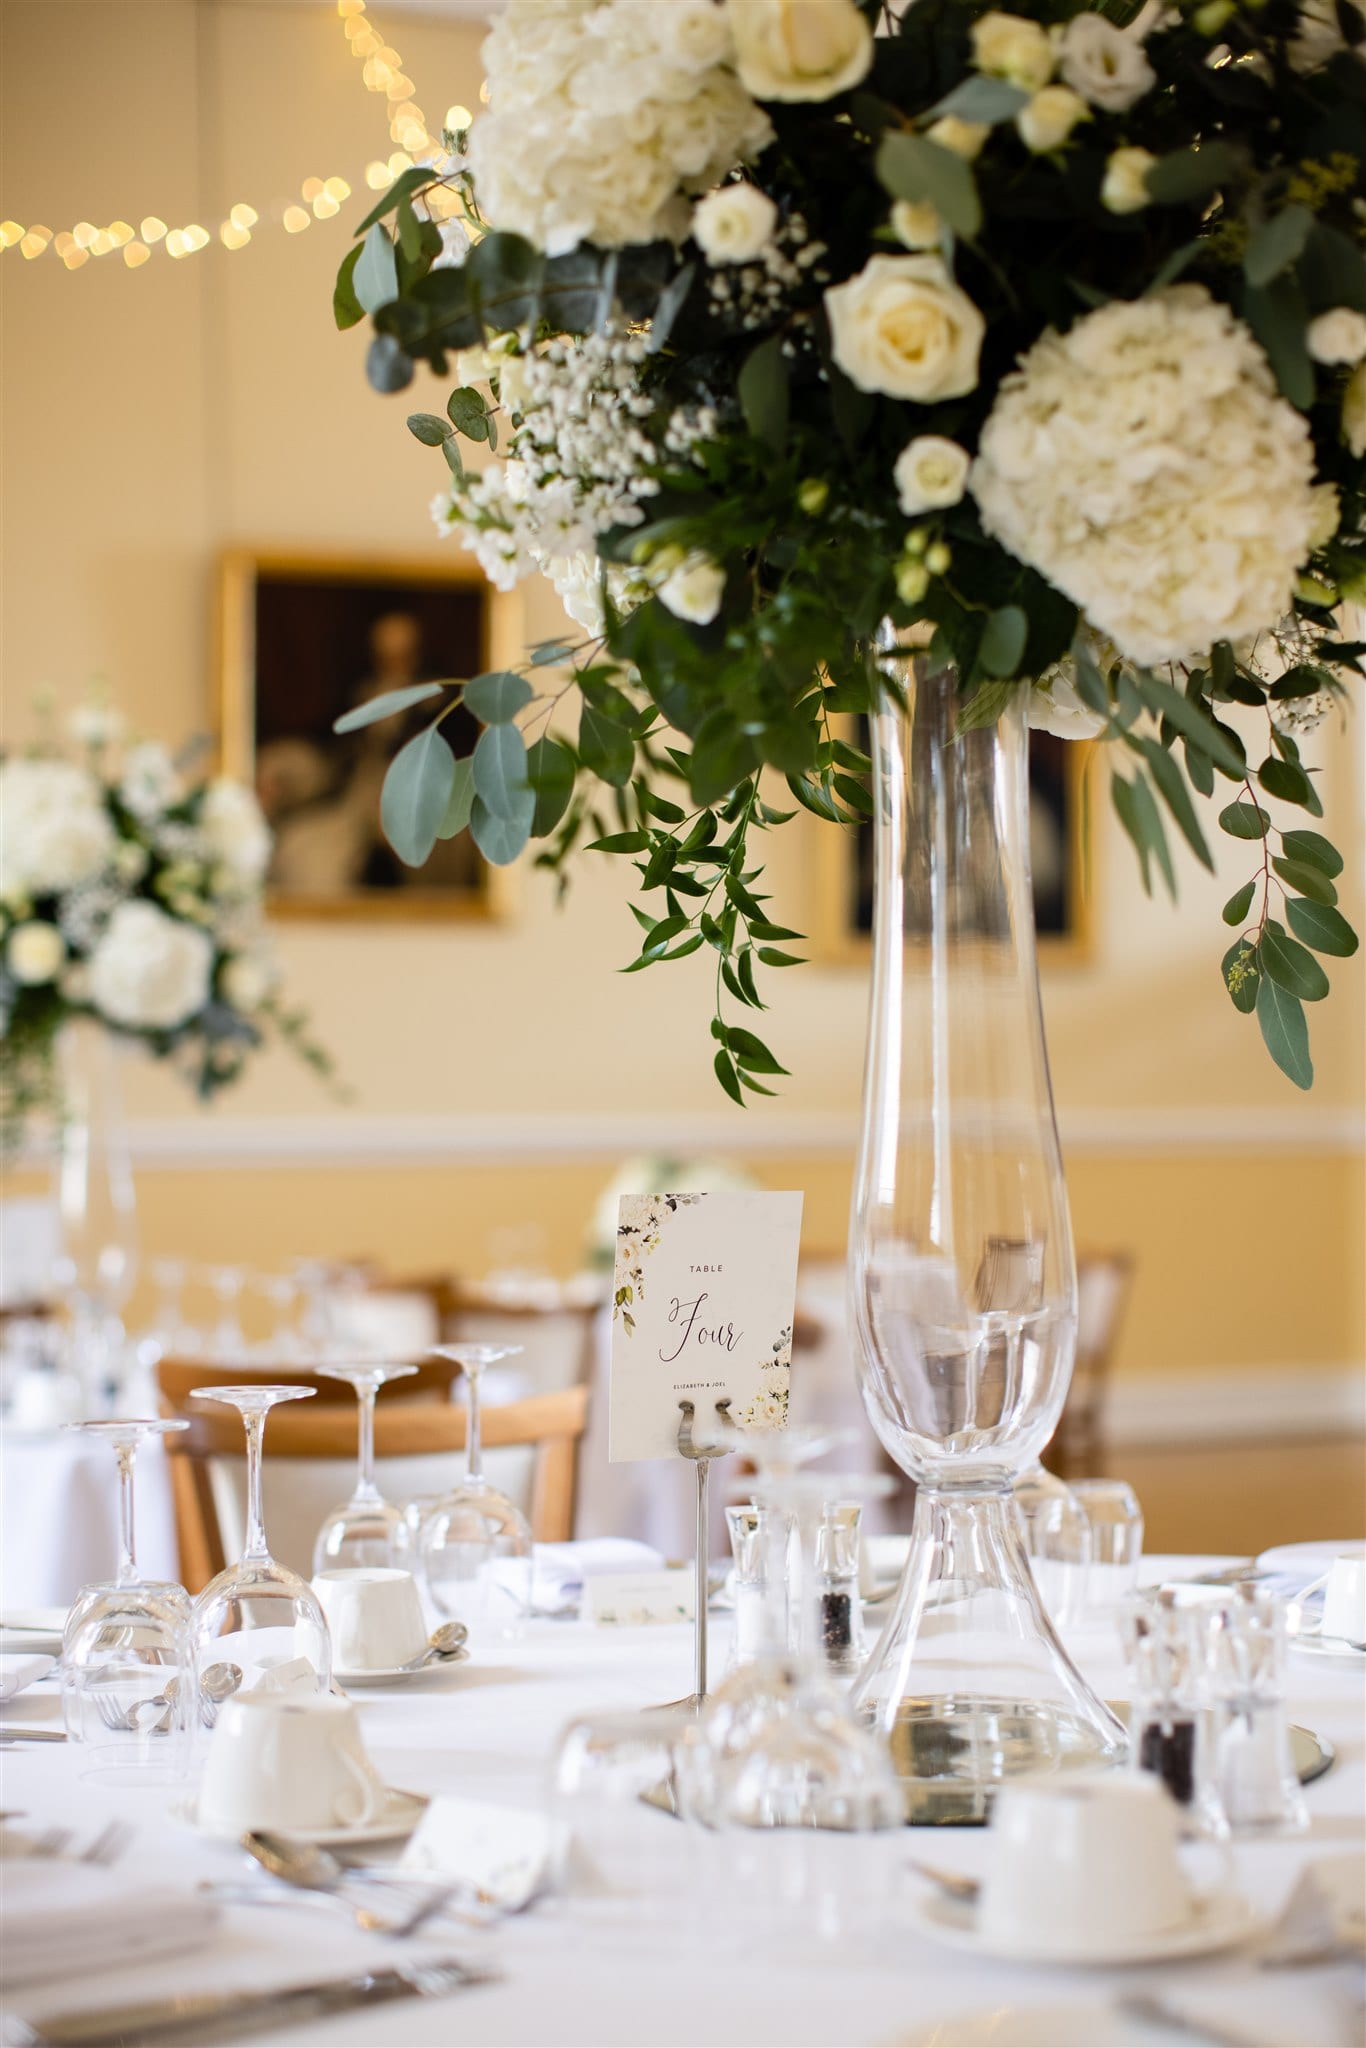 Luxurious wedding reception table decor in white and green